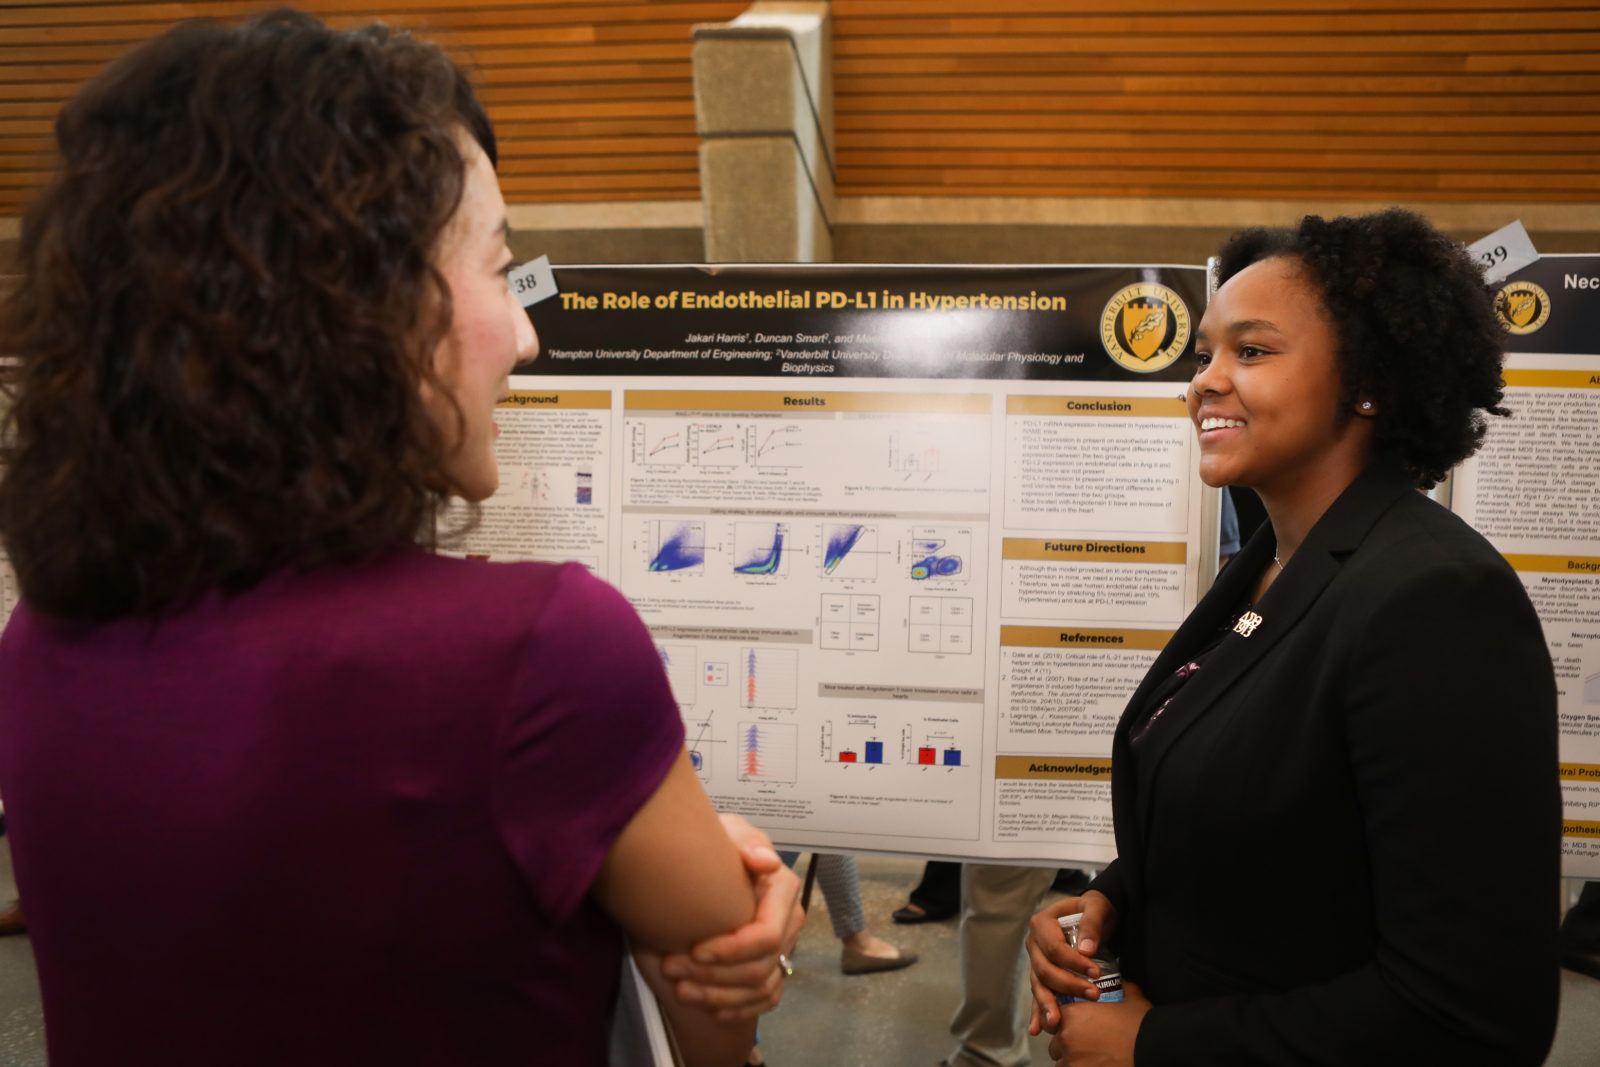 Student presenting at the 17th Annual student research symposium at the Engineering and Science Building (Susan Urmy/Vanderbilt)